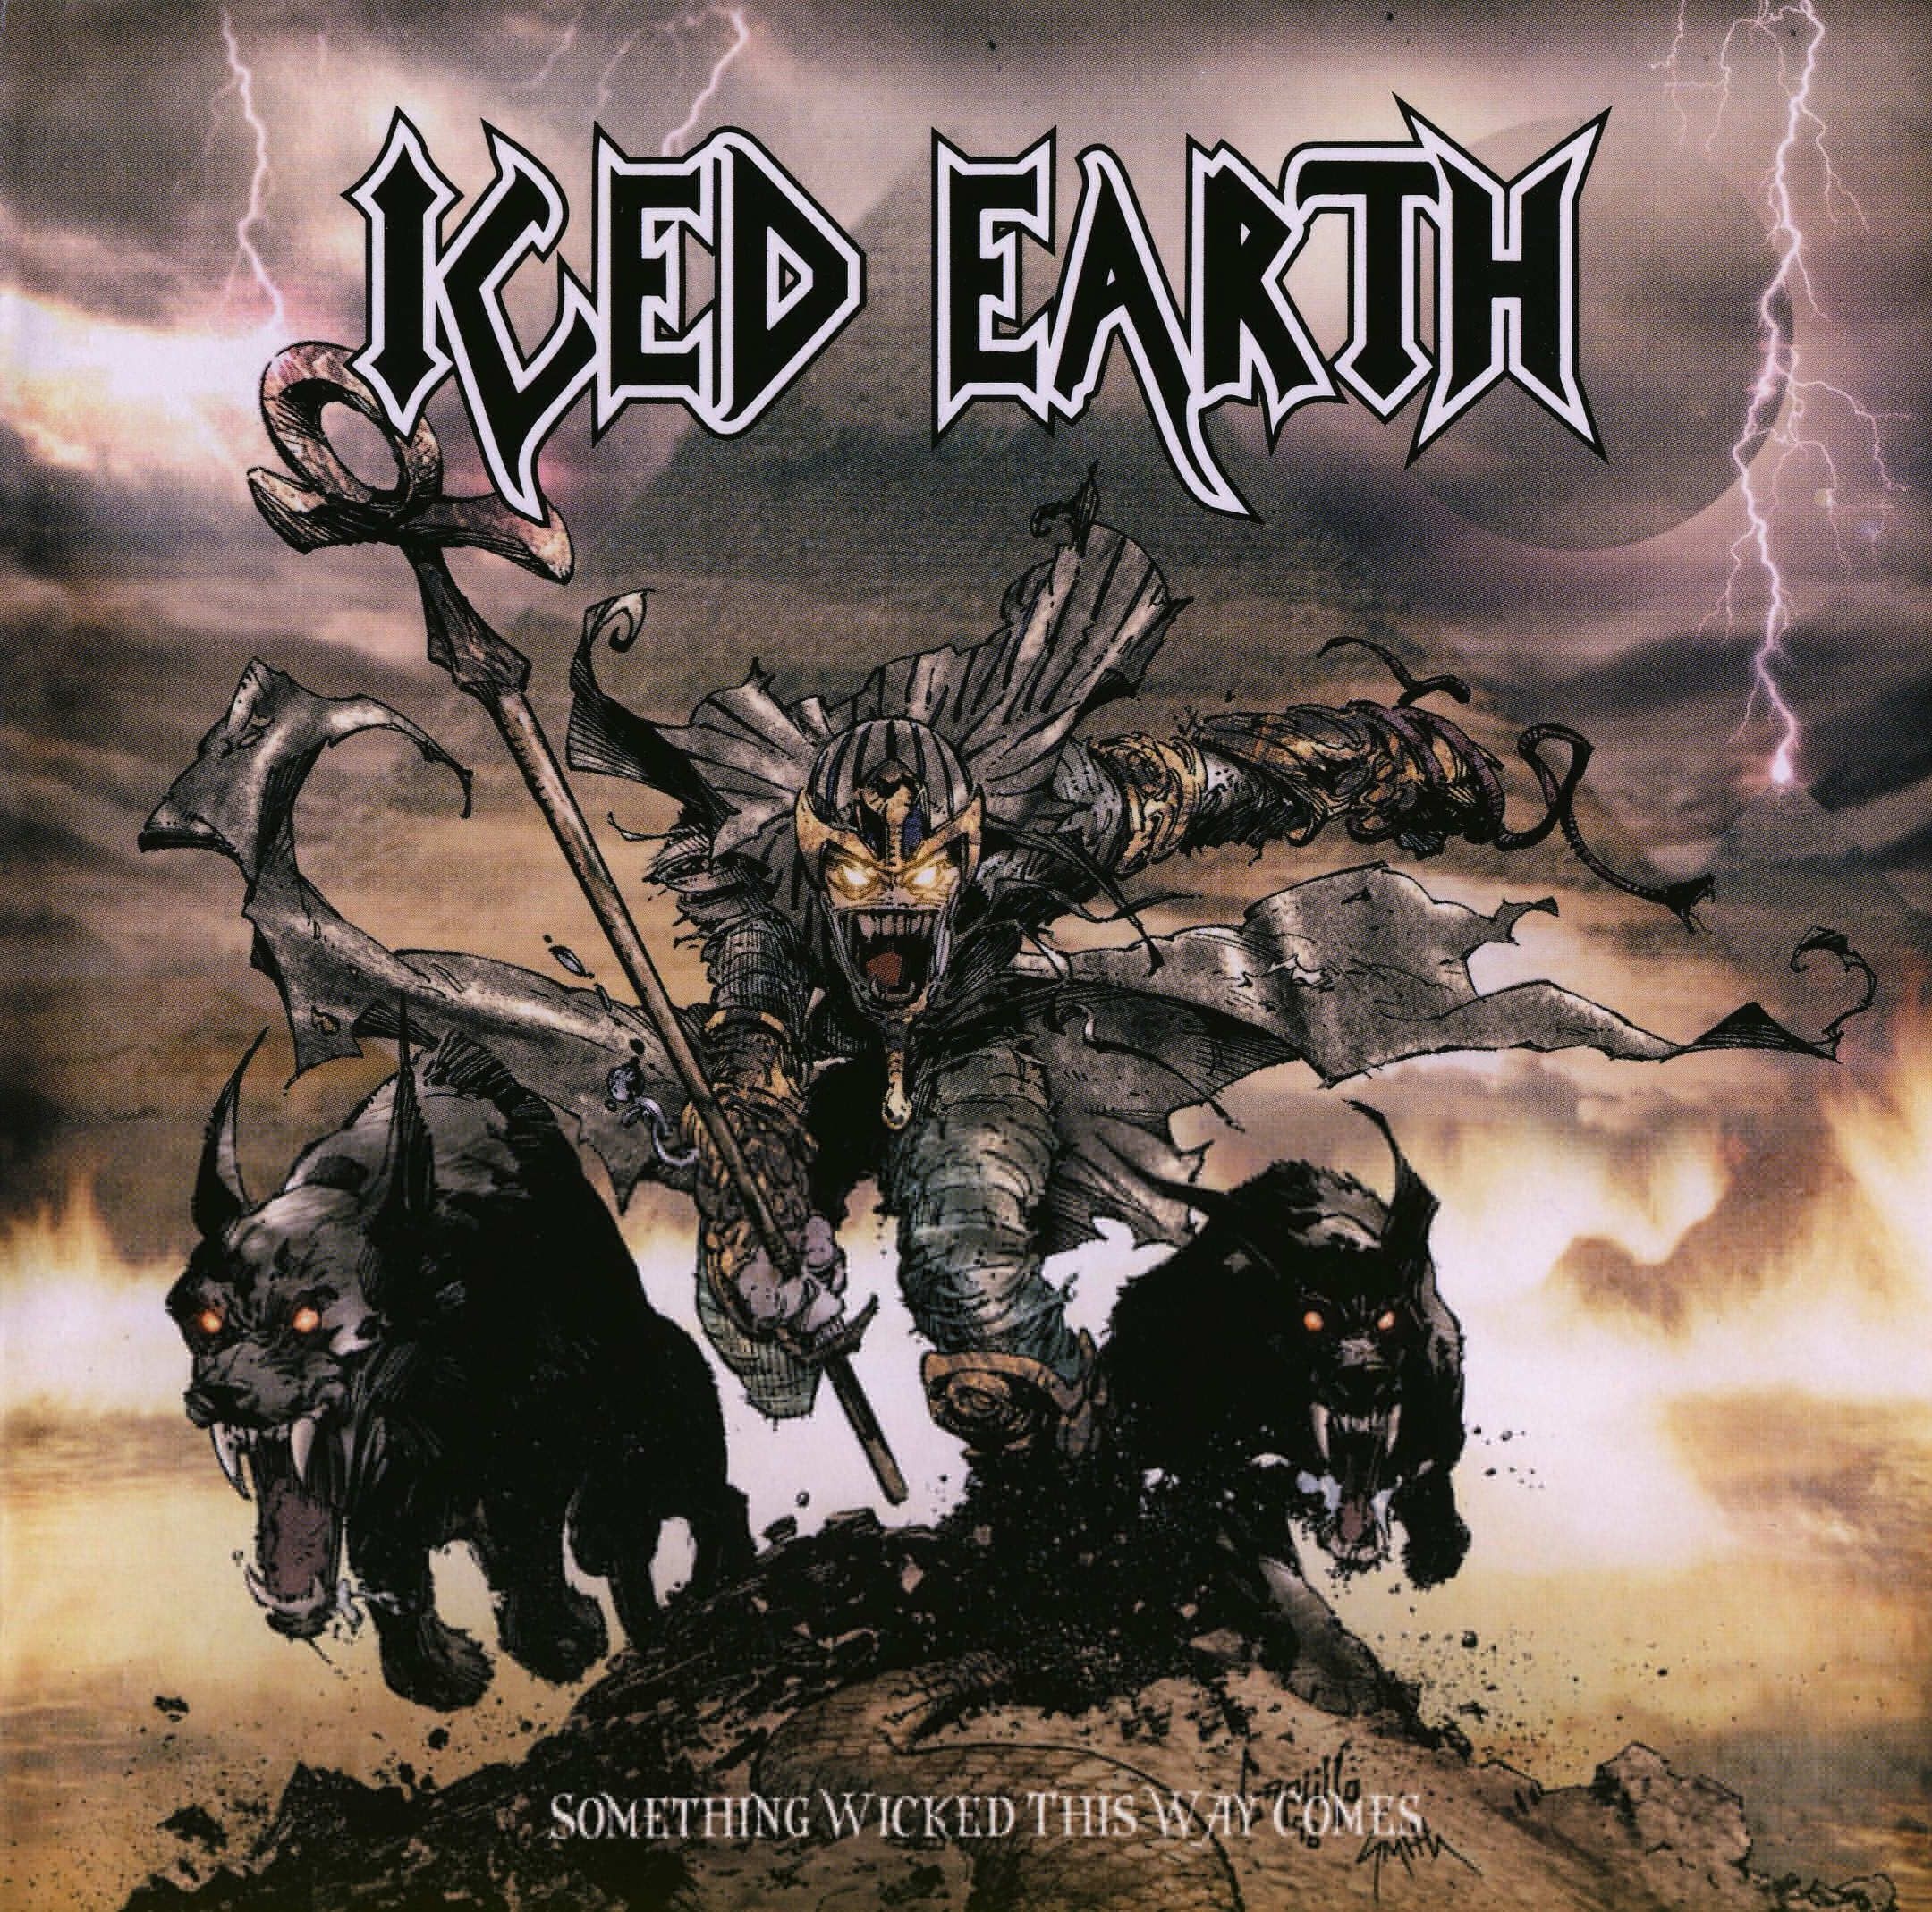 Something Wicked This Way Comes, Iced Earth (Band) Wallpaper, 2160x2140 HD Desktop